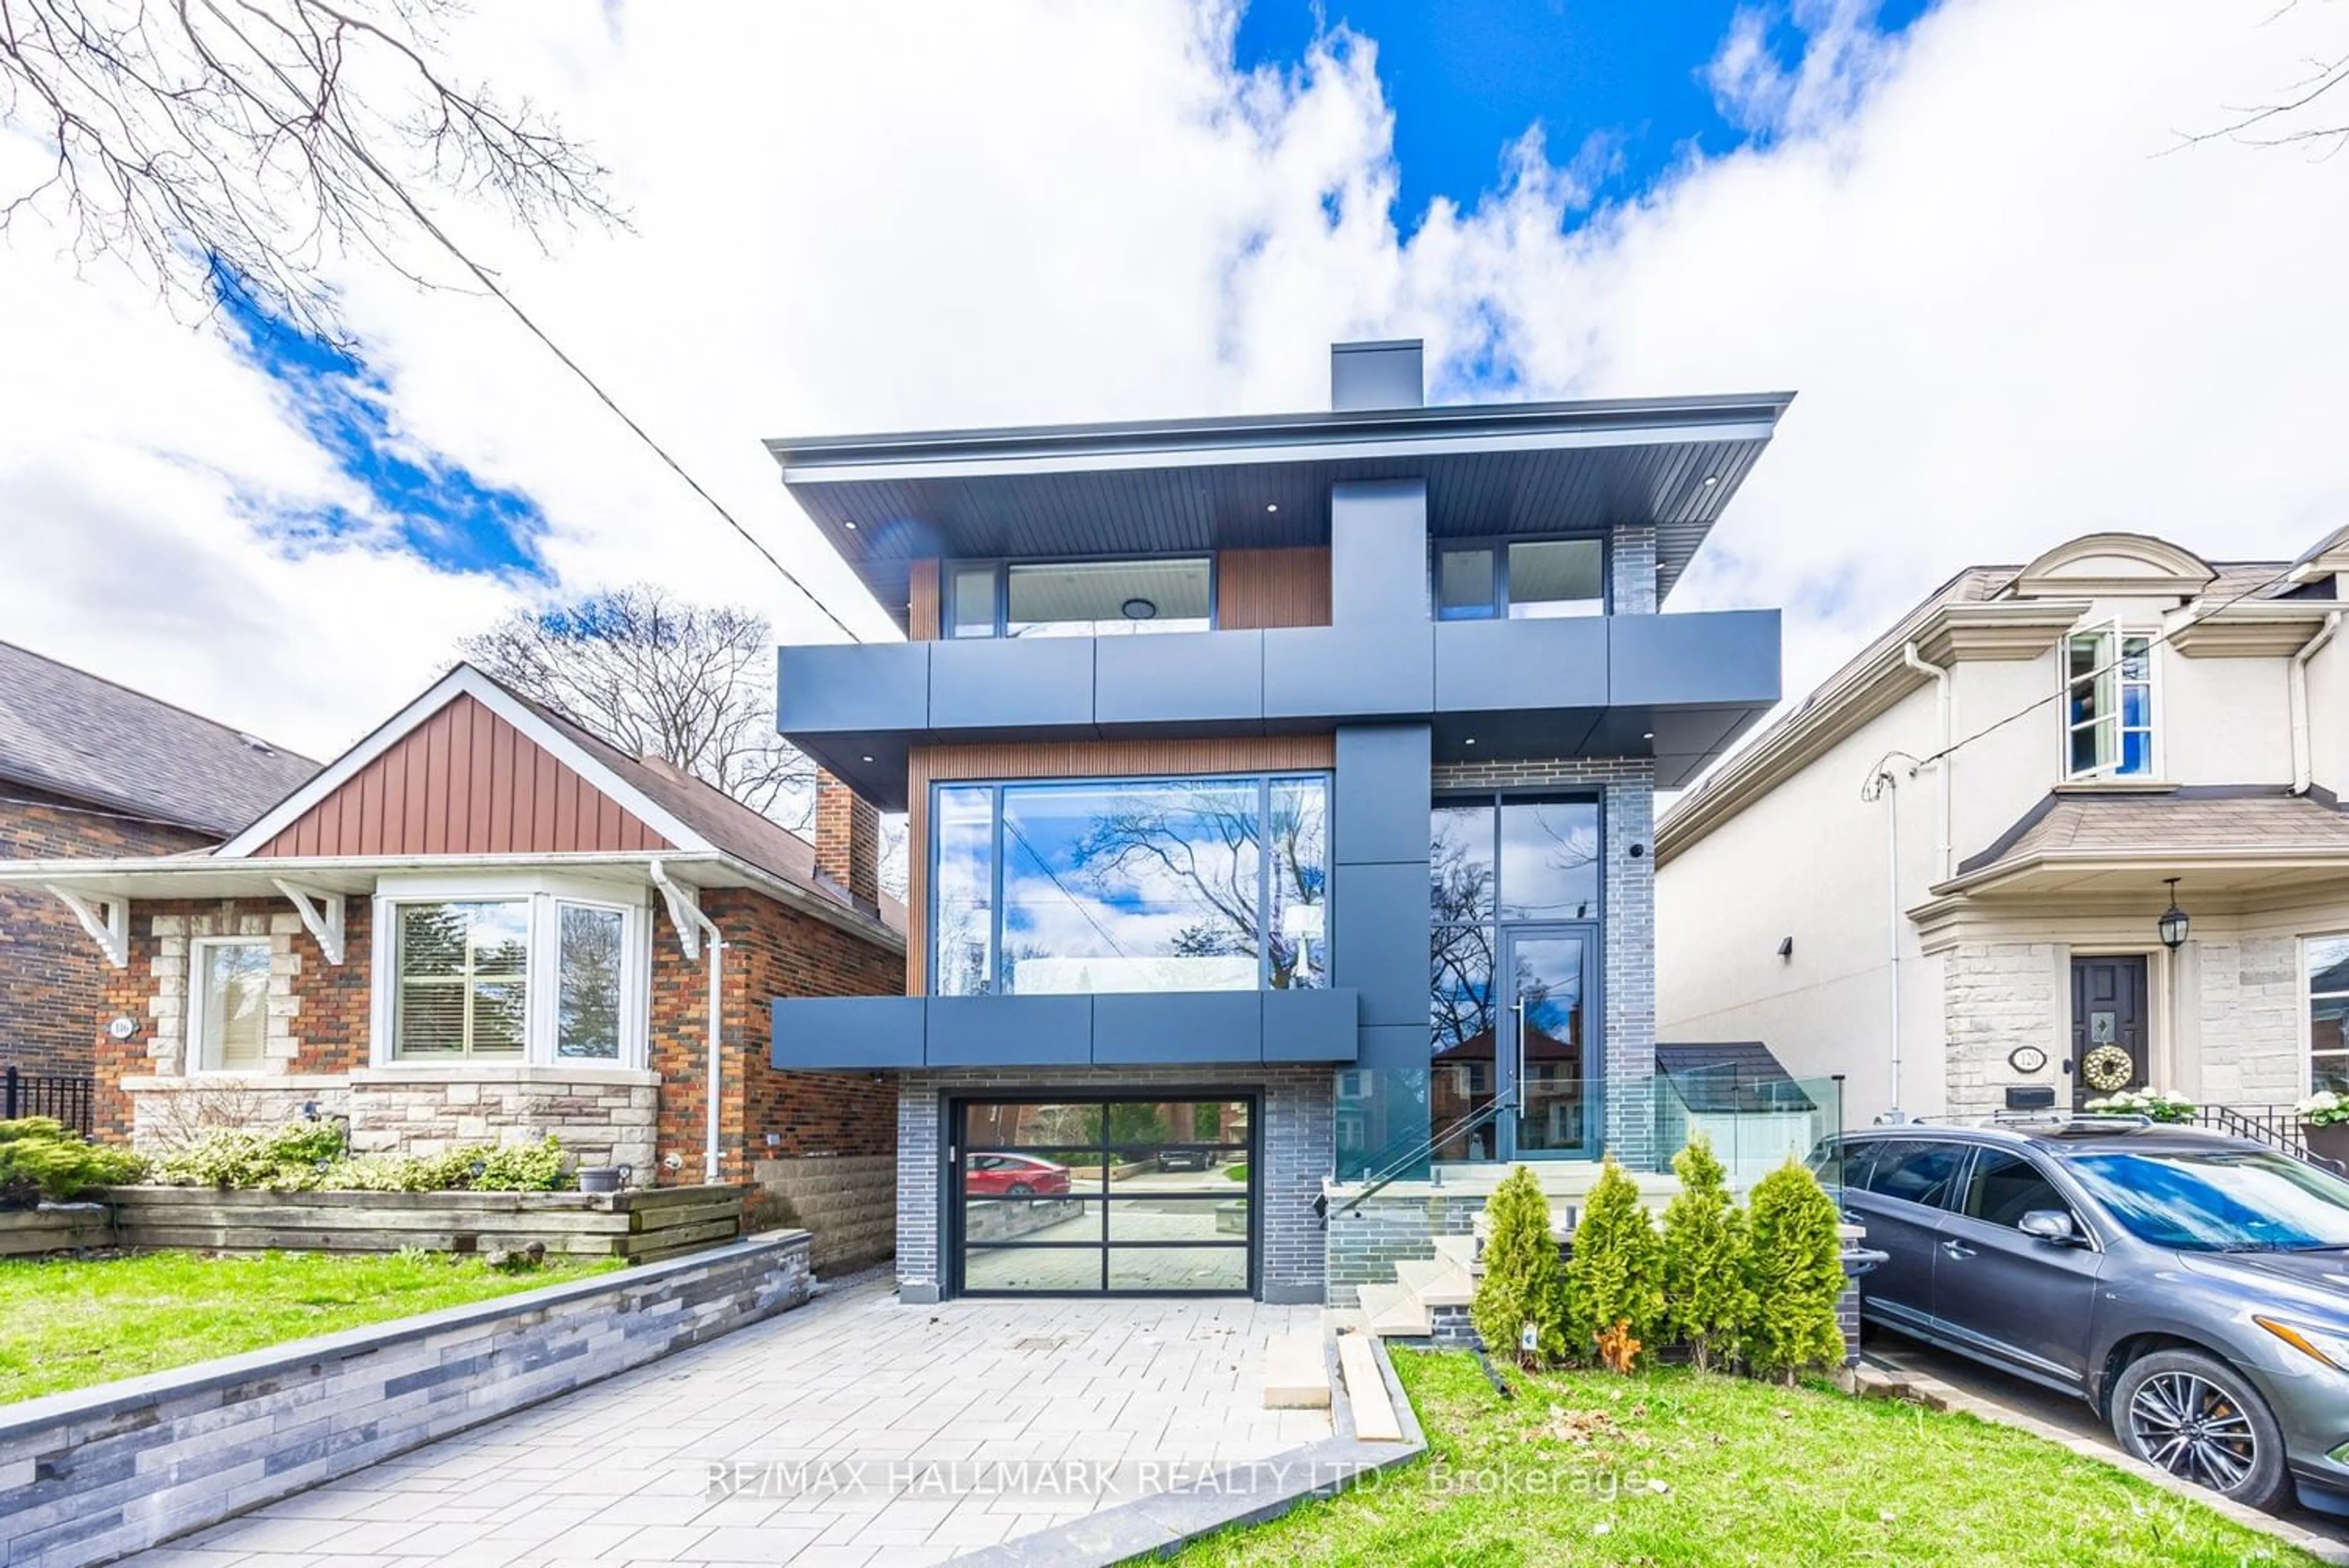 Frontside or backside of a home for 118 Airdrie Rd, Toronto Ontario M4G 1M5